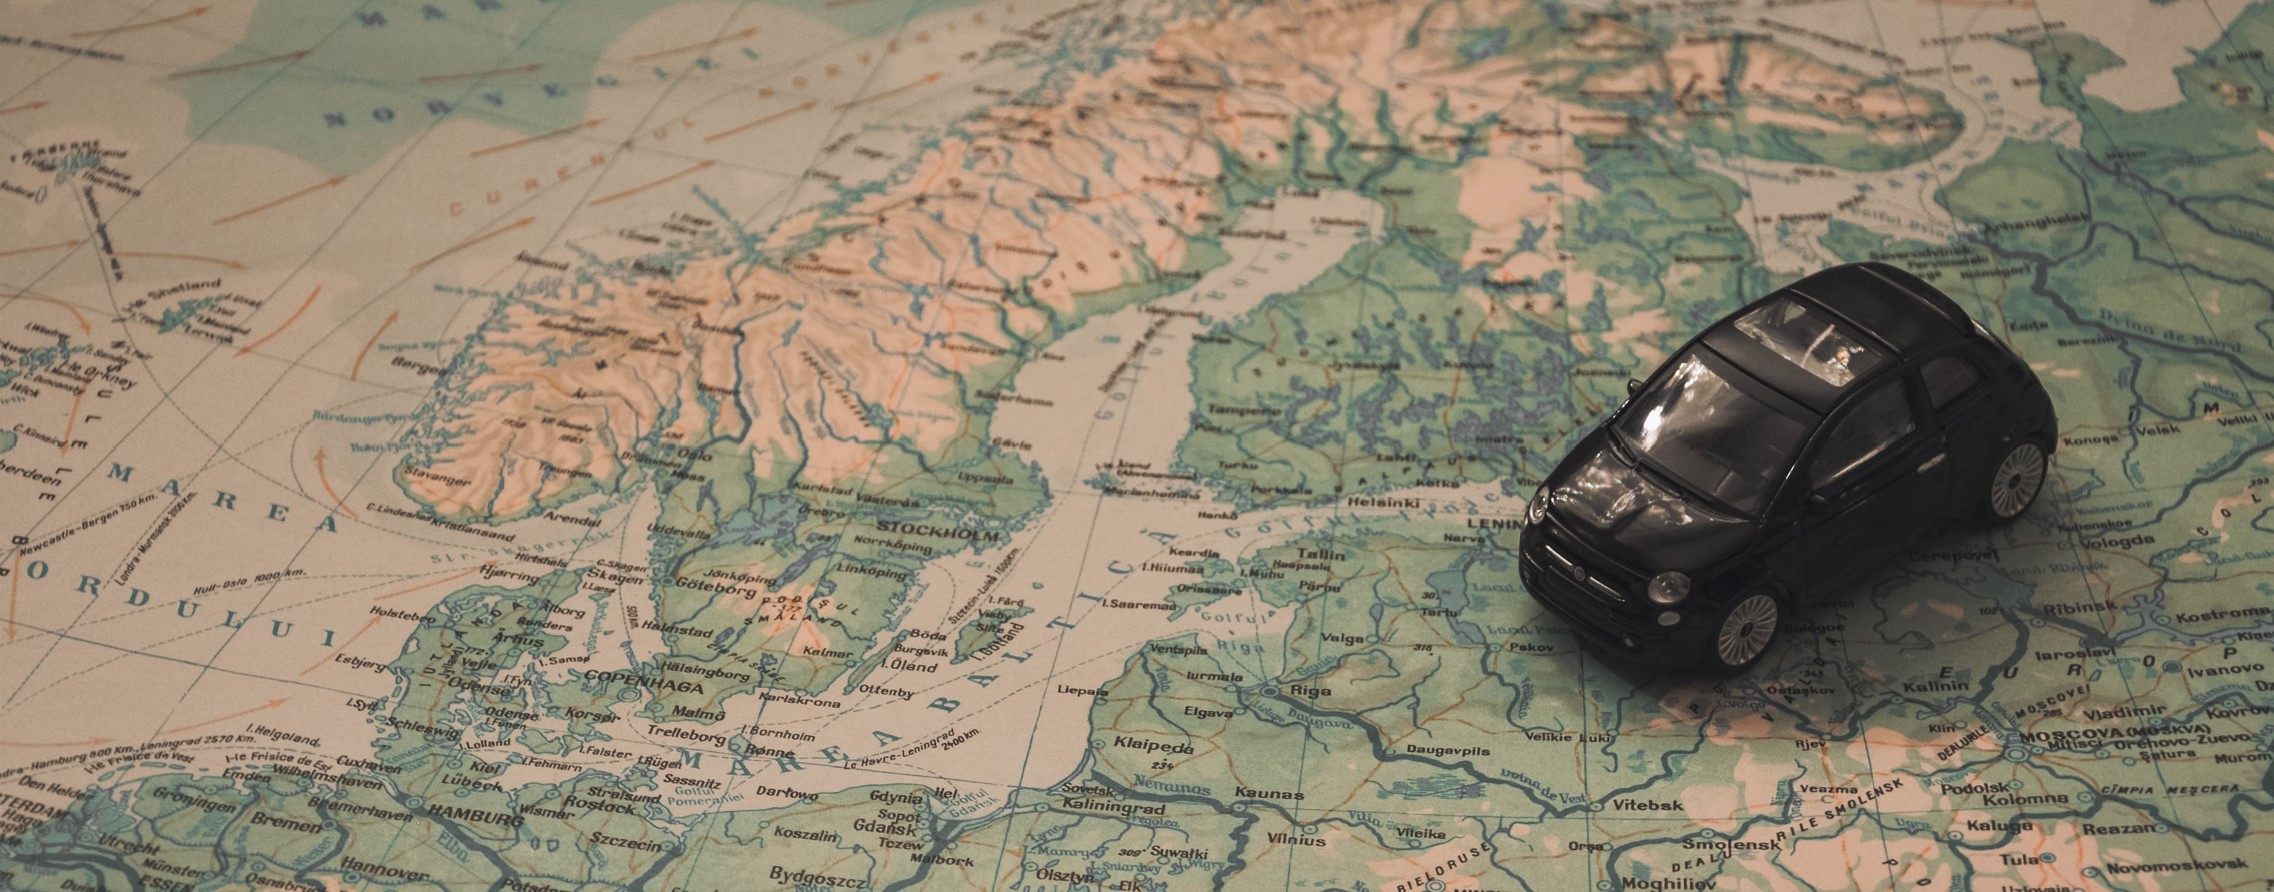 Toy car placed on a map of Northern Europe.